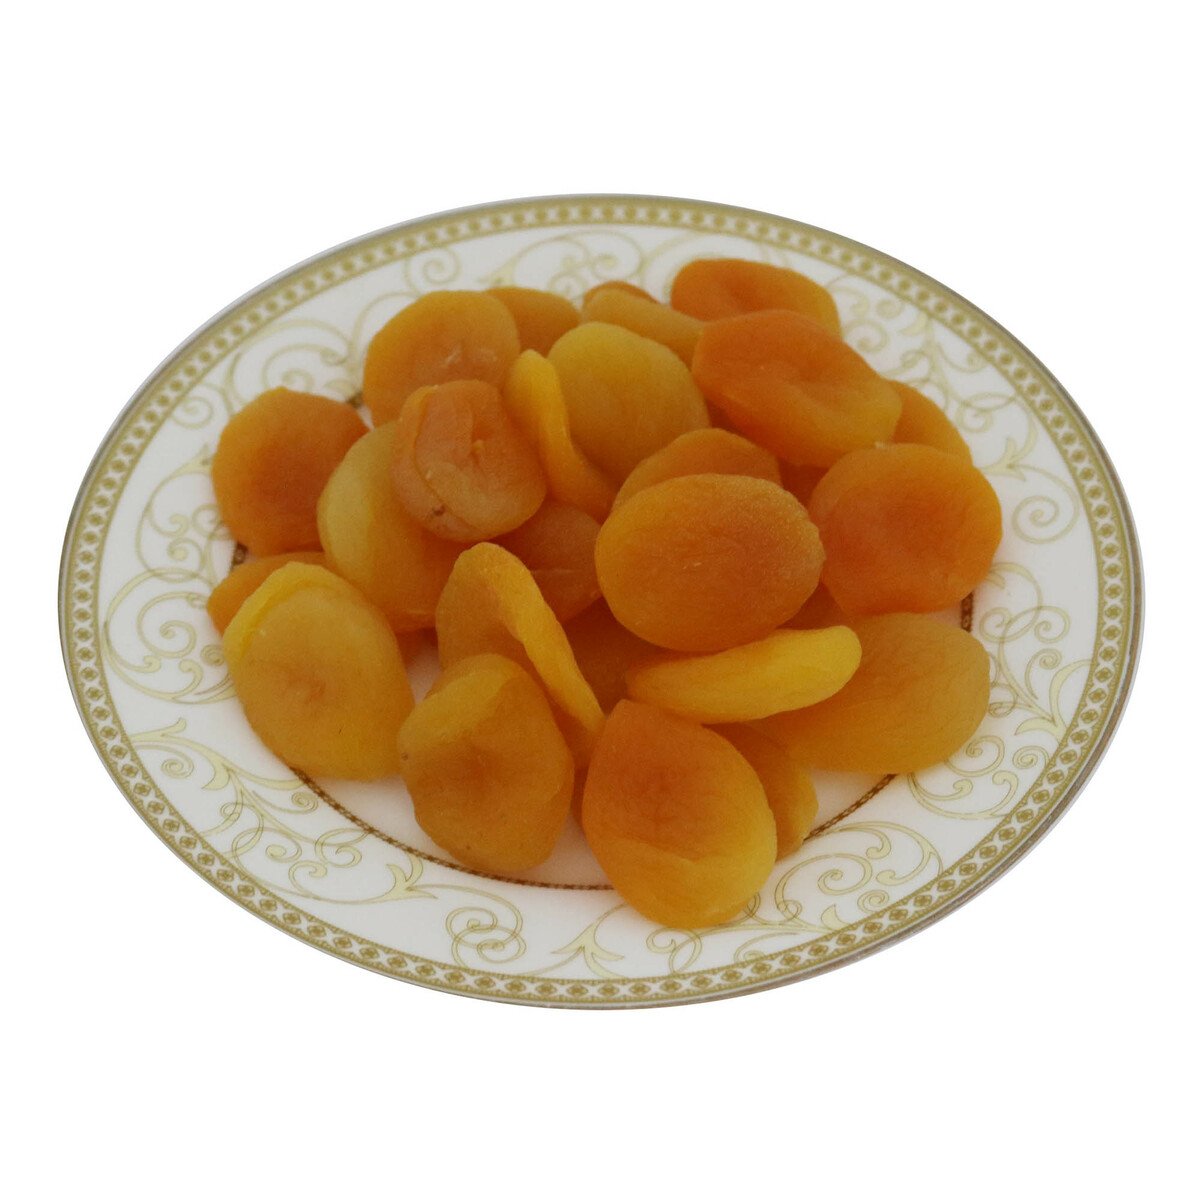 Dried Apricot 350g Approx Weight